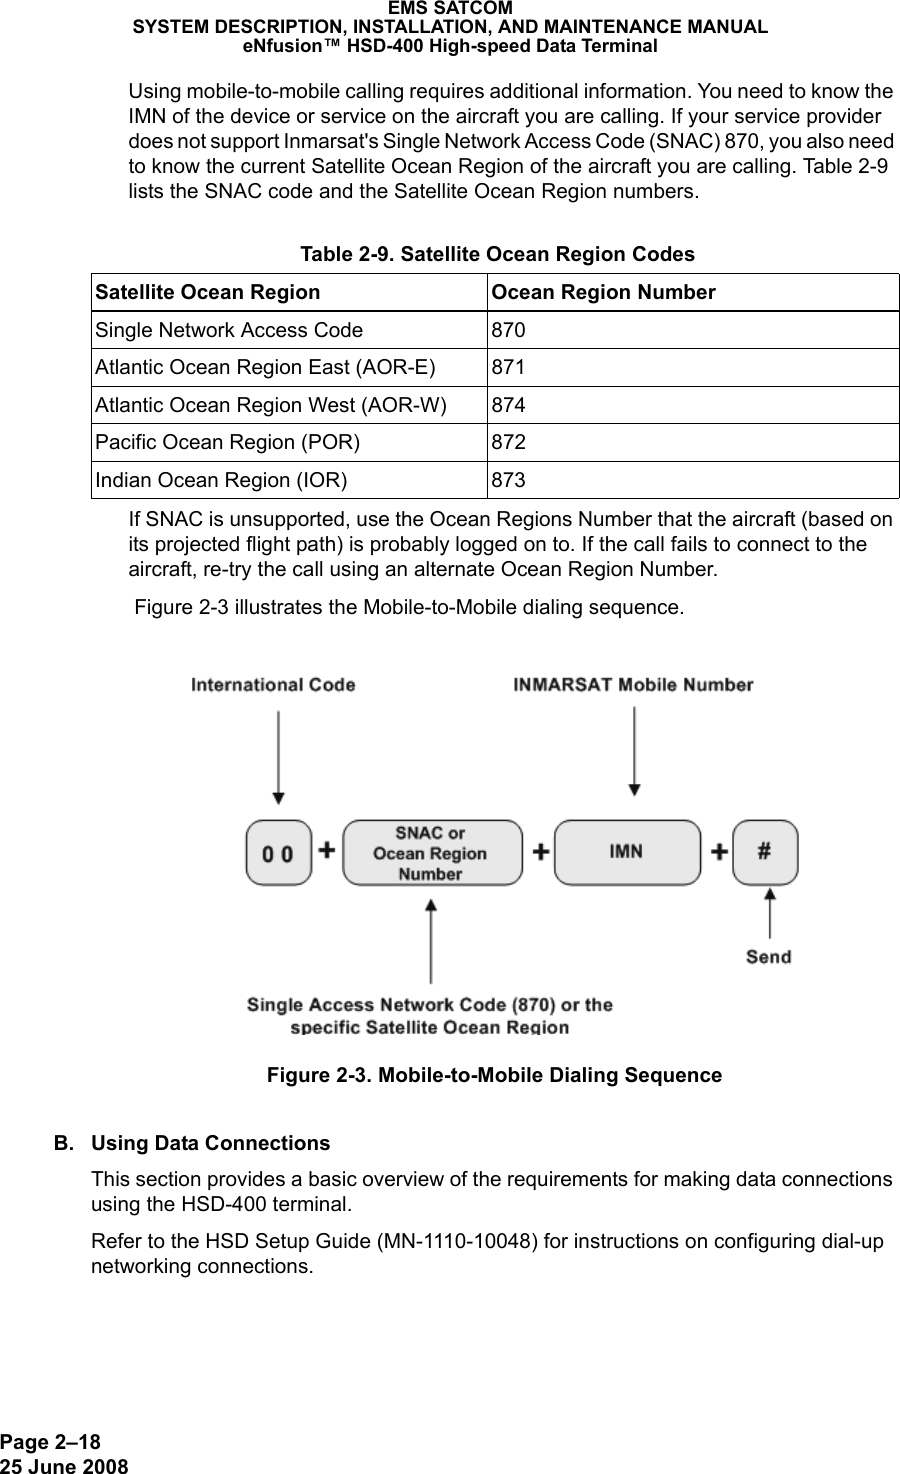 Page 2–1825 June 2008 EMS SATCOMSYSTEM DESCRIPTION, INSTALLATION, AND MAINTENANCE MANUALeNfusion™ HSD-400 High-speed Data TerminalUsing mobile-to-mobile calling requires additional information. You need to know the IMN of the device or service on the aircraft you are calling. If your service provider does not support Inmarsat&apos;s Single Network Access Code (SNAC) 870, you also need to know the current Satellite Ocean Region of the aircraft you are calling. Table 2-9 lists the SNAC code and the Satellite Ocean Region numbers.If SNAC is unsupported, use the Ocean Regions Number that the aircraft (based on its projected flight path) is probably logged on to. If the call fails to connect to the aircraft, re-try the call using an alternate Ocean Region Number.  Figure 2-3 illustrates the Mobile-to-Mobile dialing sequence.Figure 2-3. Mobile-to-Mobile Dialing SequenceB. Using Data ConnectionsThis section provides a basic overview of the requirements for making data connections using the HSD-400 terminal.Refer to the HSD Setup Guide (MN-1110-10048) for instructions on configuring dial-up networking connections. Table 2-9. Satellite Ocean Region CodesSatellite Ocean Region Ocean Region NumberSingle Network Access Code 870Atlantic Ocean Region East (AOR-E) 871Atlantic Ocean Region West (AOR-W) 874Pacific Ocean Region (POR) 872Indian Ocean Region (IOR) 873